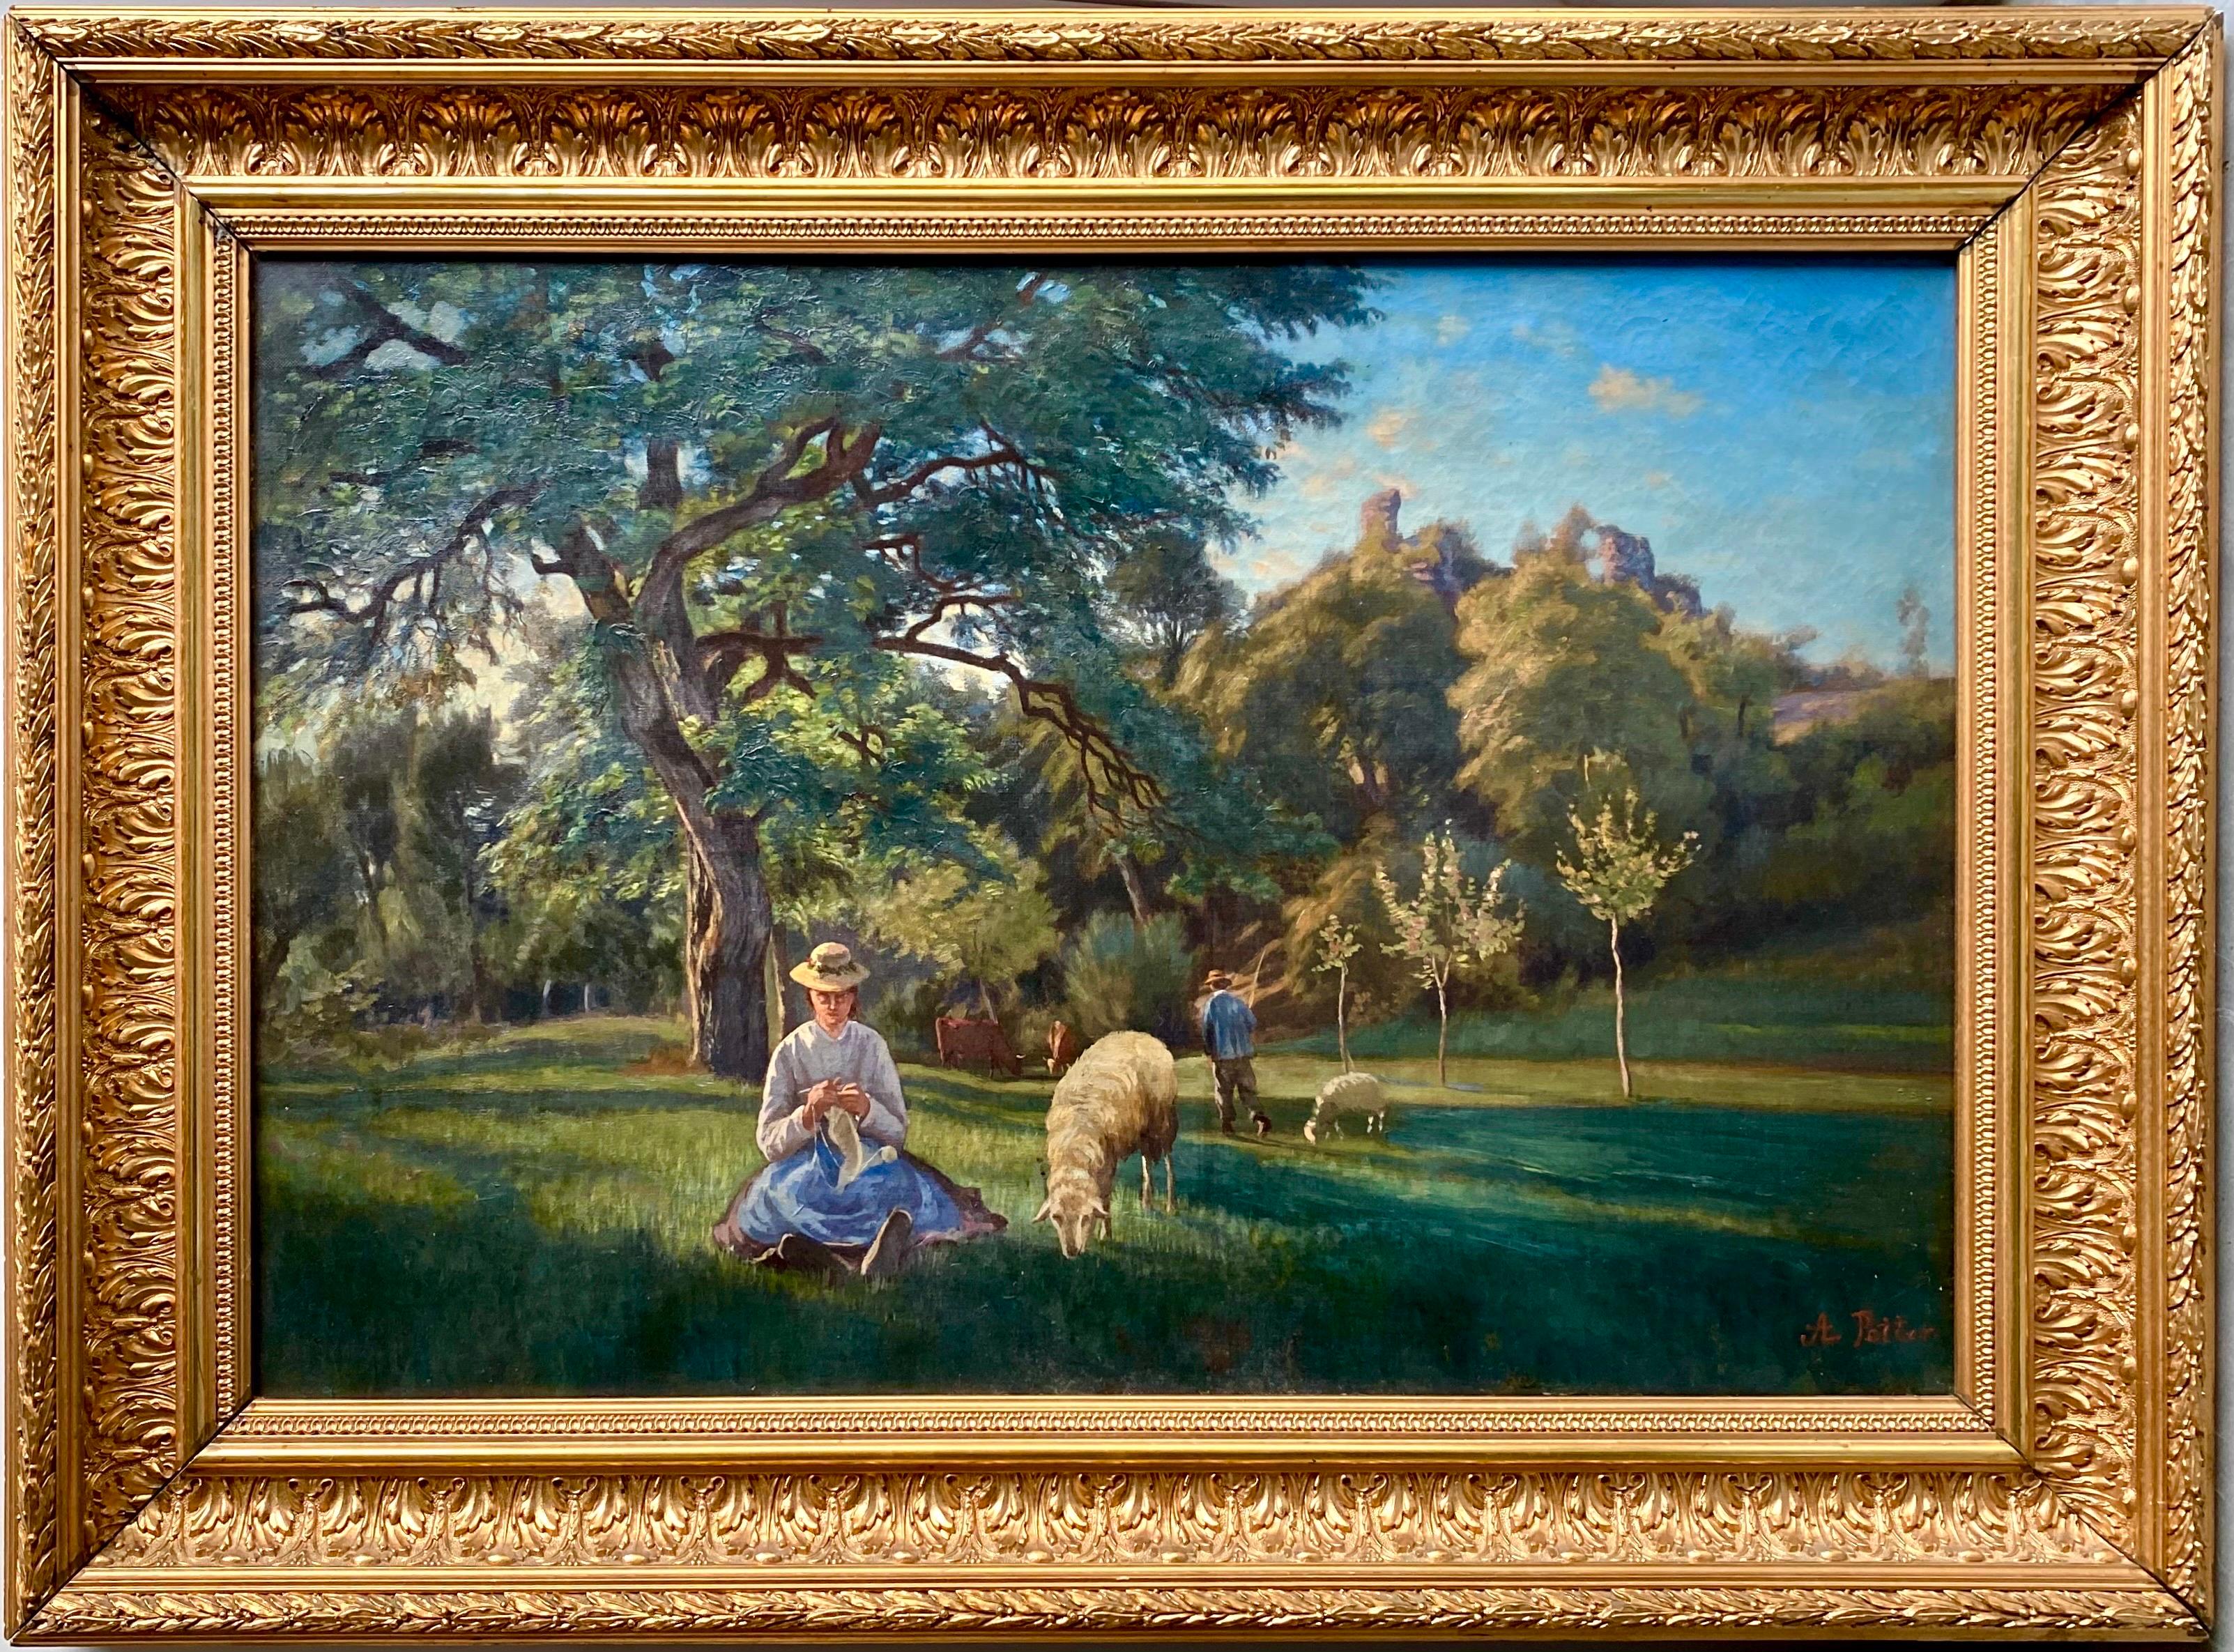 Adolphe Potter Landscape Painting - Romantic 19th century Swiss painting of a Girl with her sheep - Barbizon